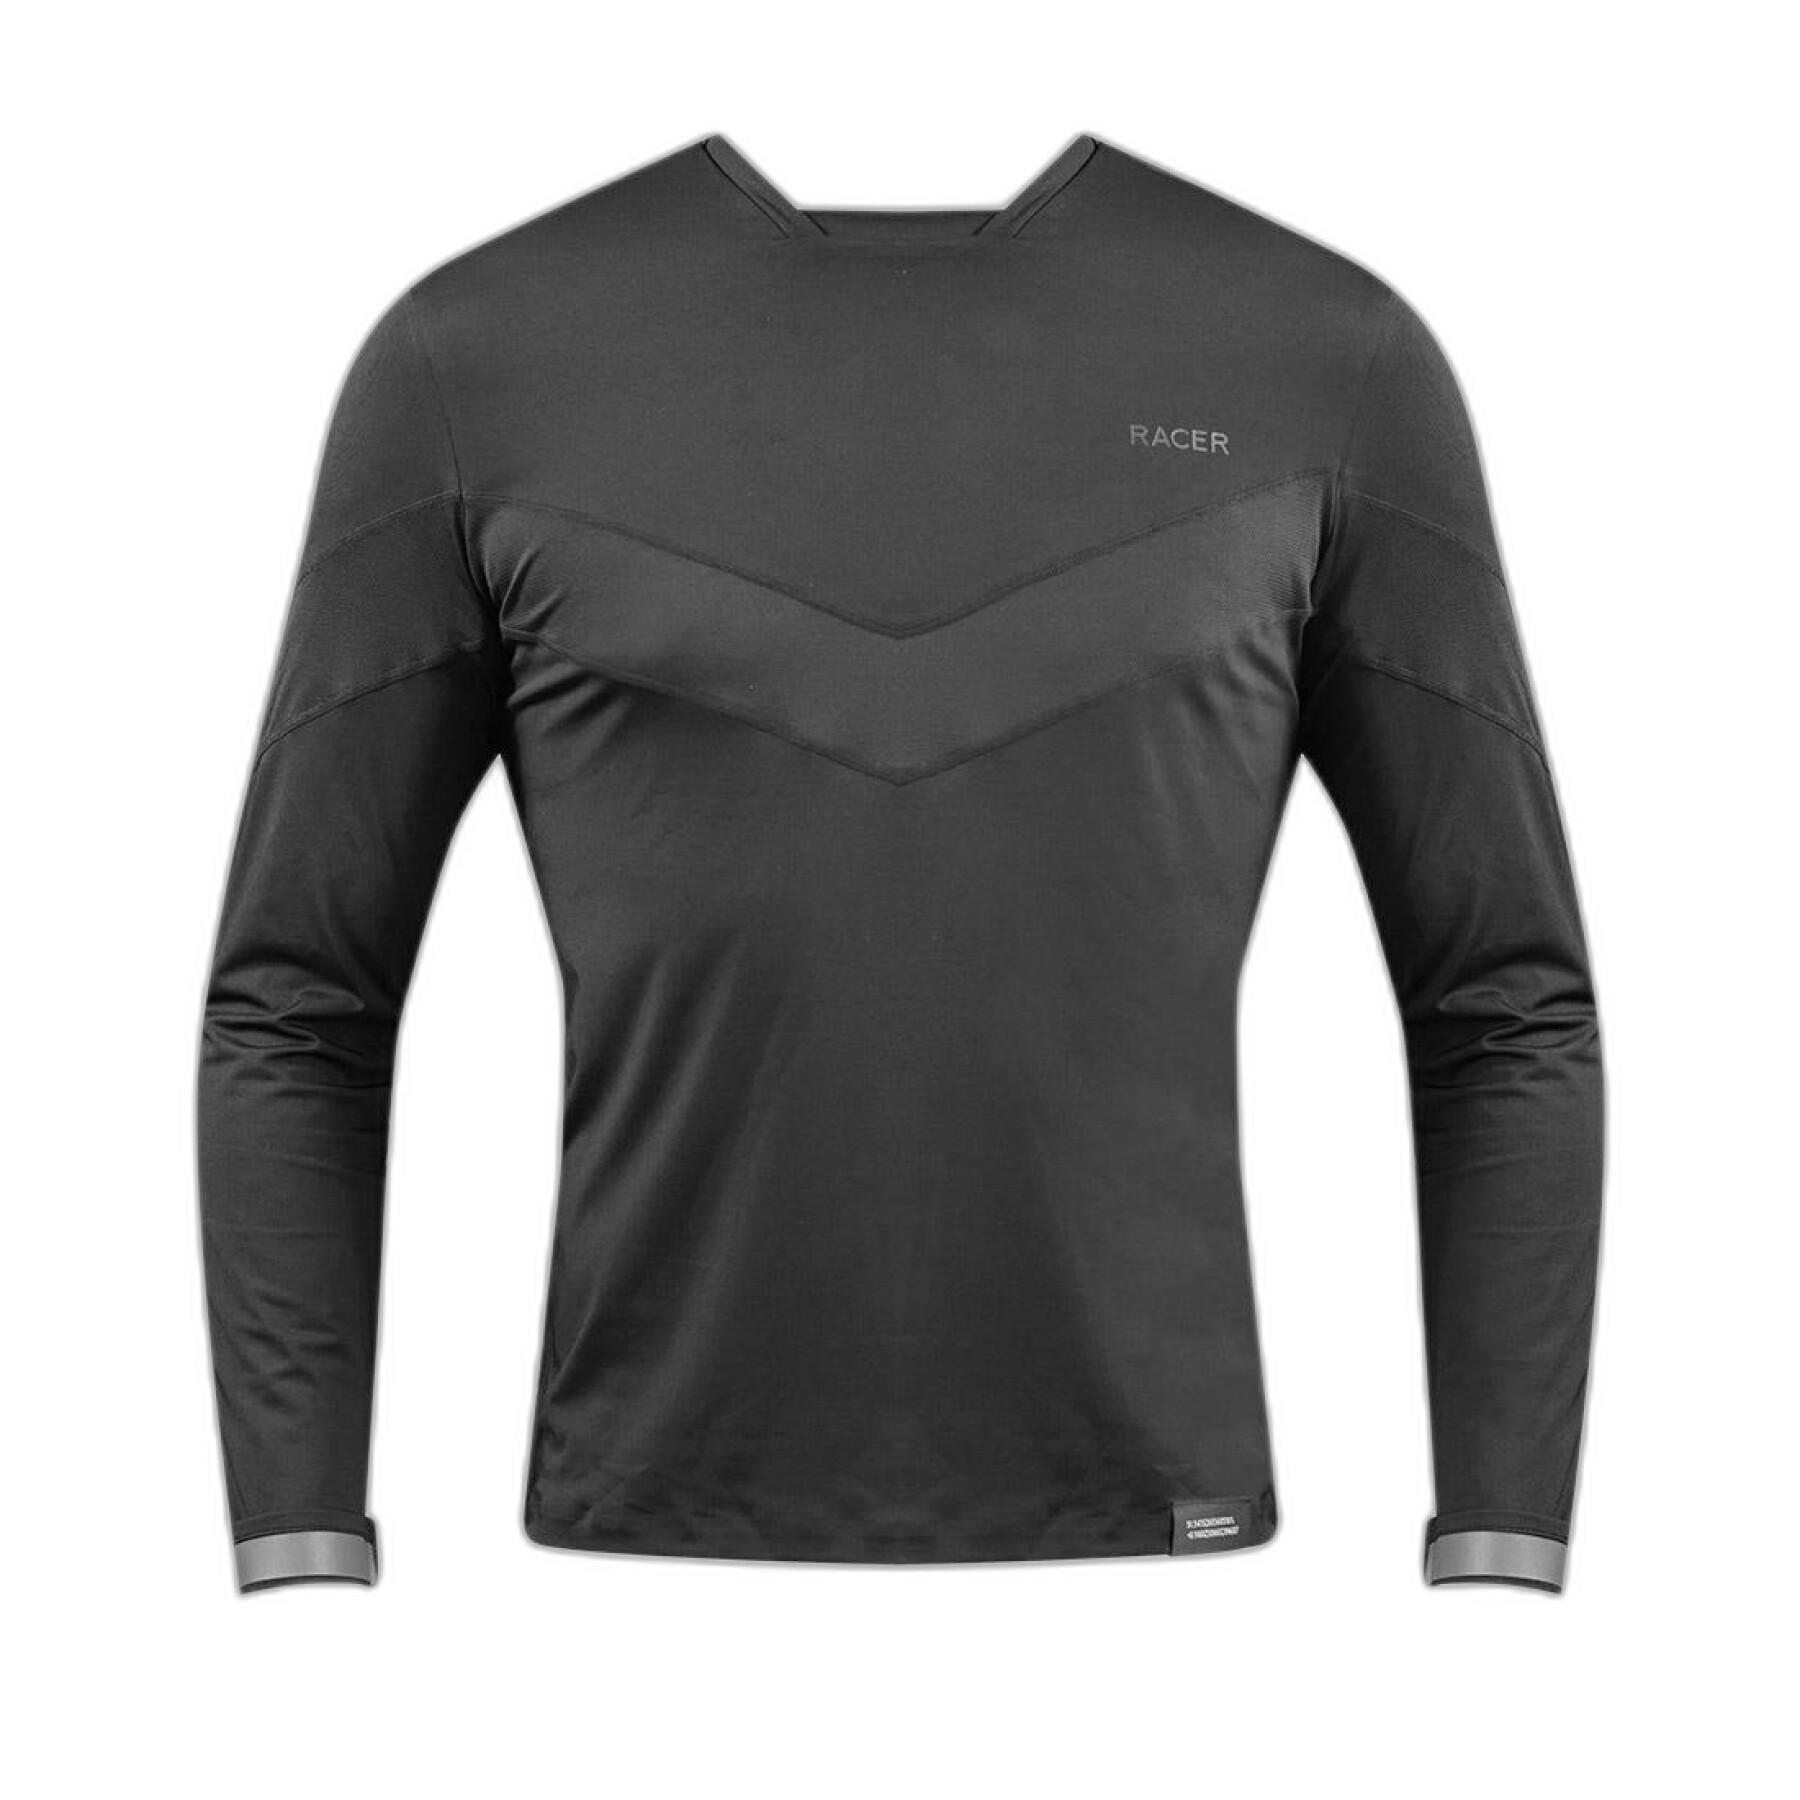 Breathable technical jersey Racer